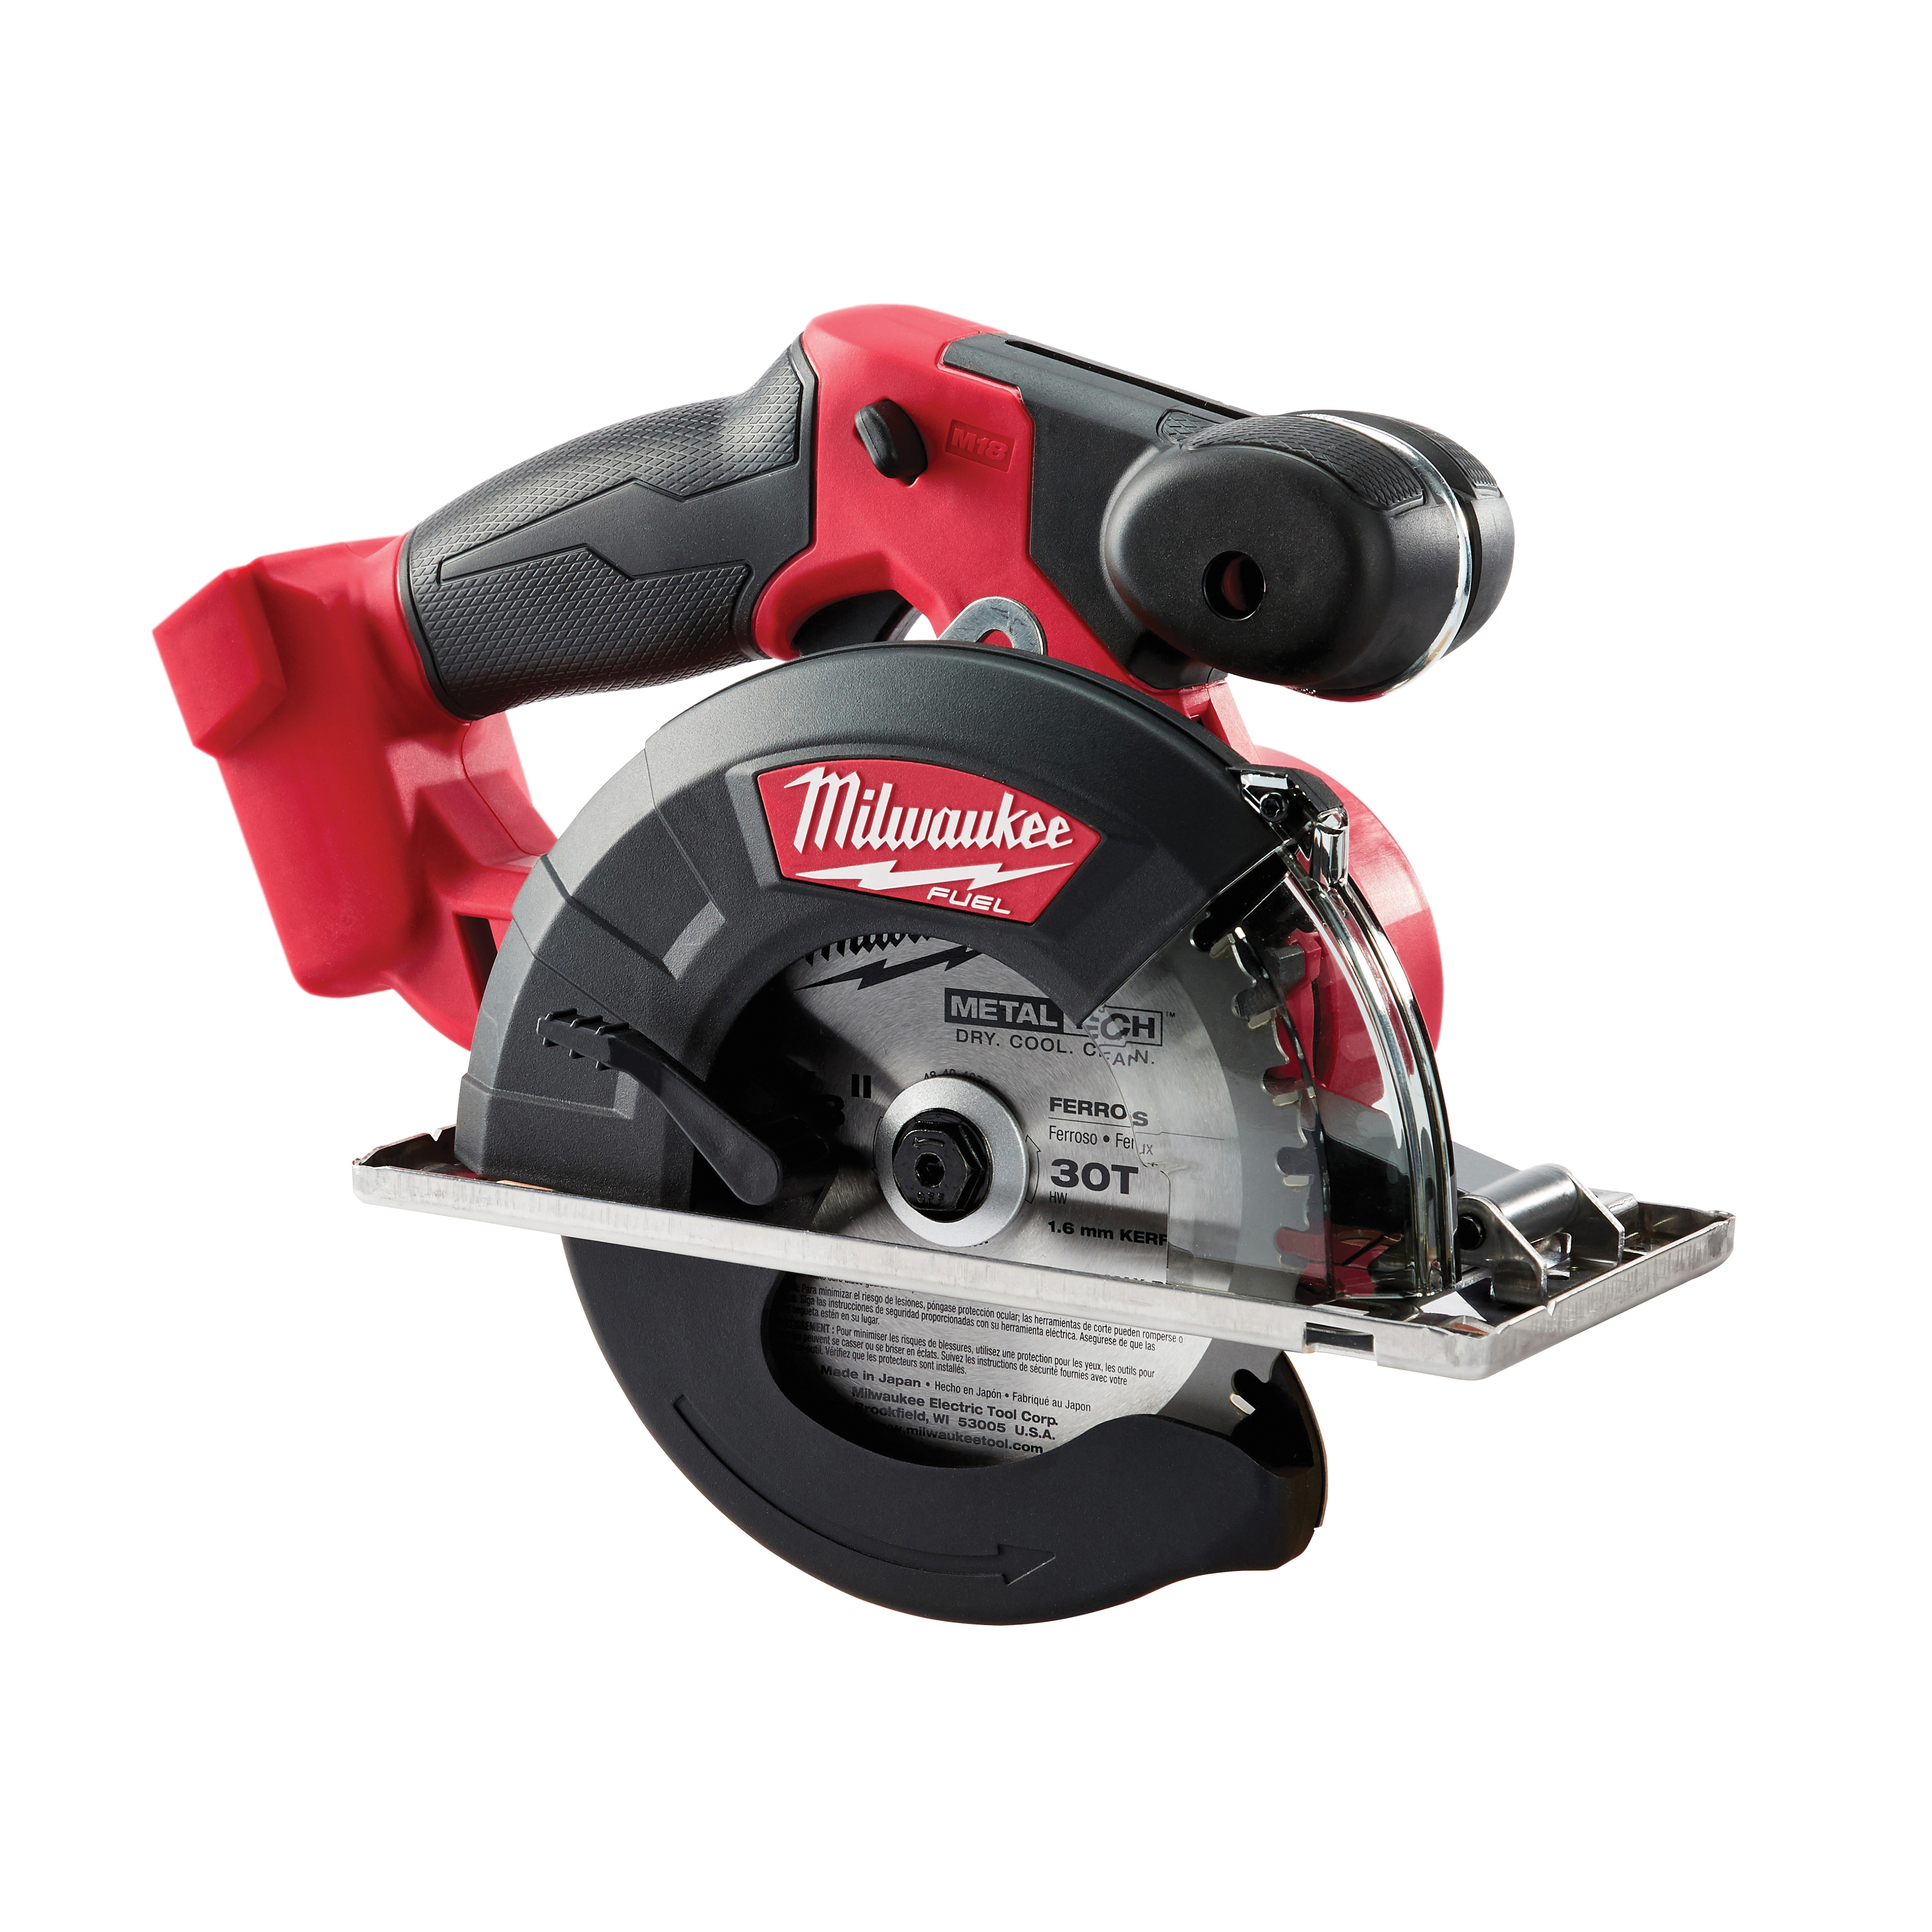 Milwaukee® M18 FUEL™ 2782-20 Circular Saw, Tool/Kit: Tool, 5-3/8 in, 5-7/8 in Dia Blade, 18 VDC, Lithium-Ion Battery